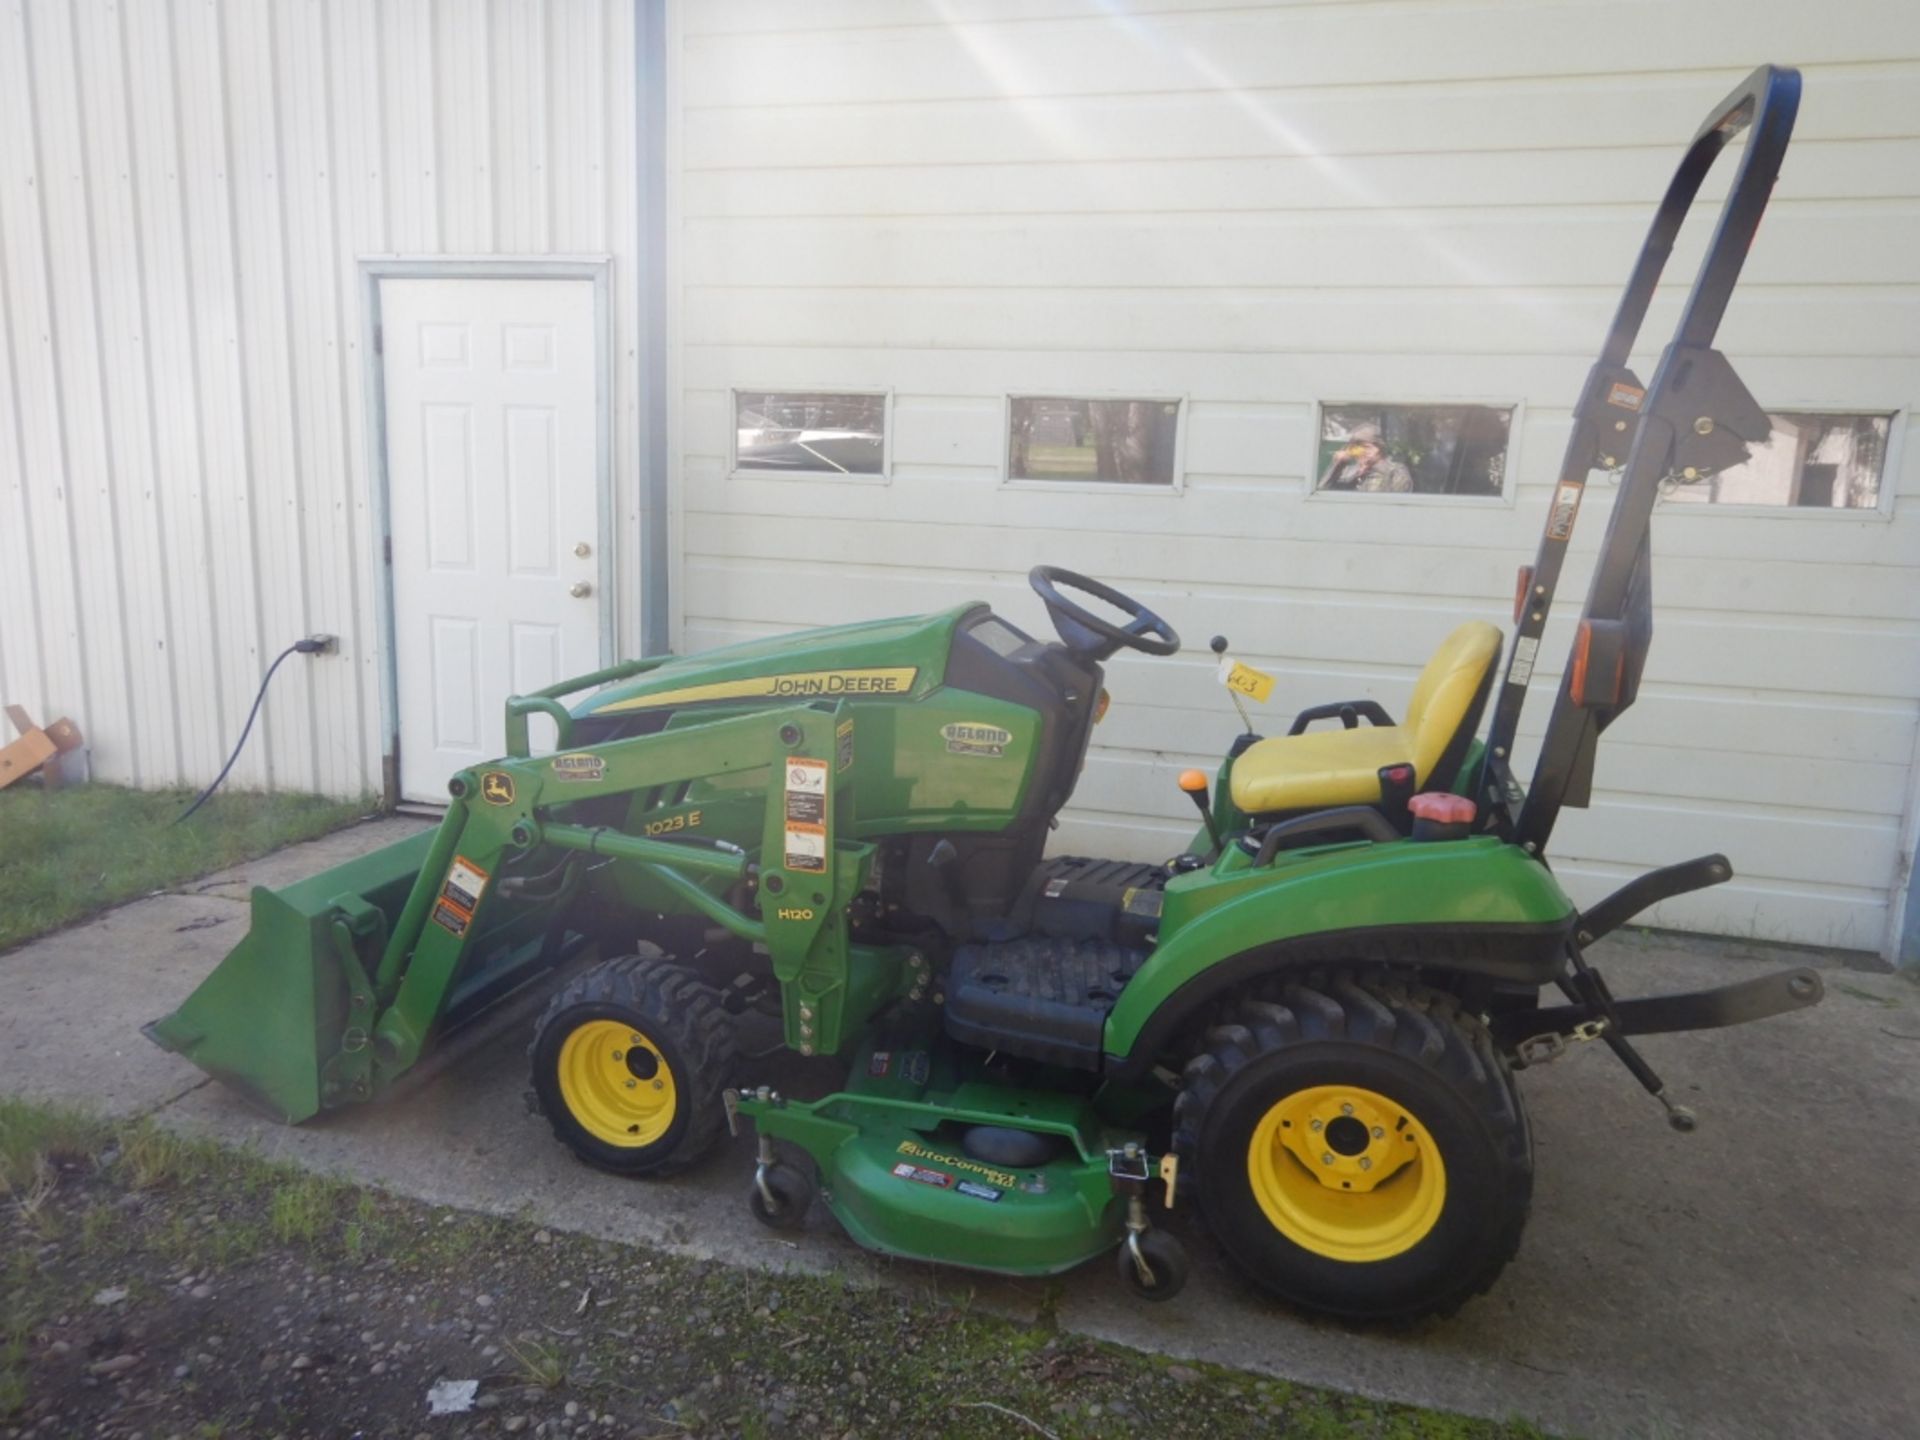 2012 JOHN DEERE 1023E 4WD COMPACT TRACTOR W/ FRONT END LOADER, 3 HYDRAULICS, DELUXE HOOD GUARD, - Image 3 of 11